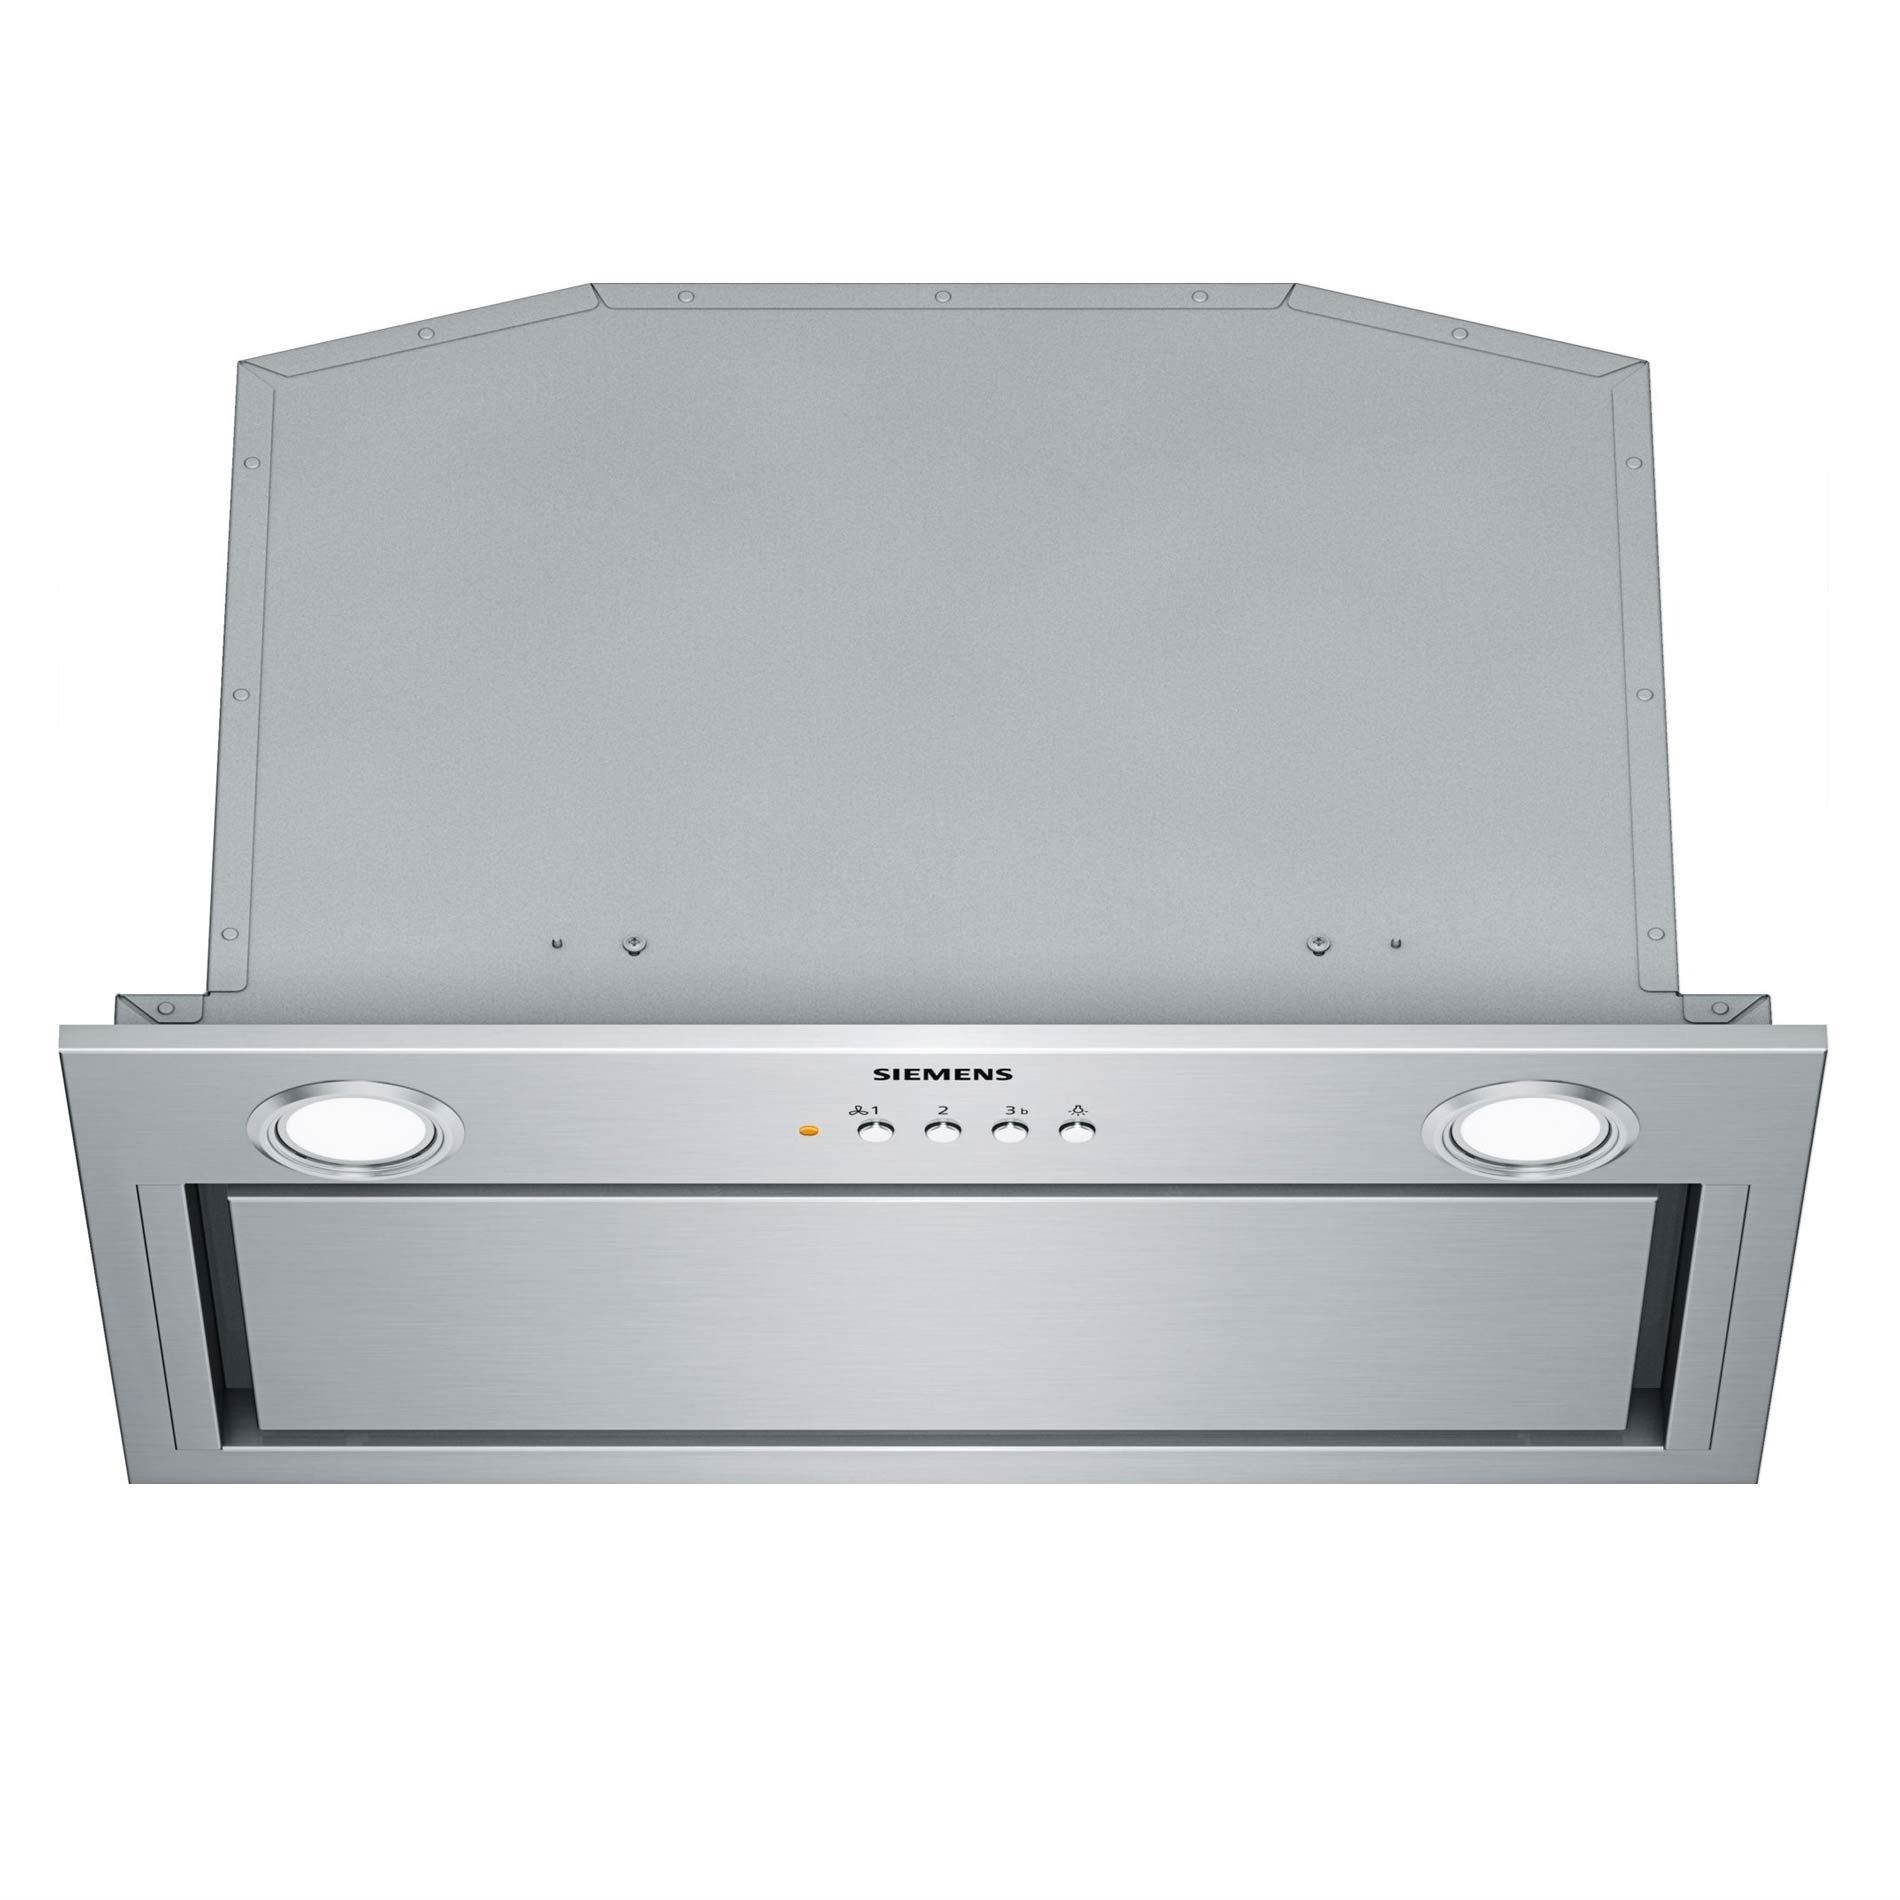 Picture of Siemens LB57574GB Built-In Canopy Hood